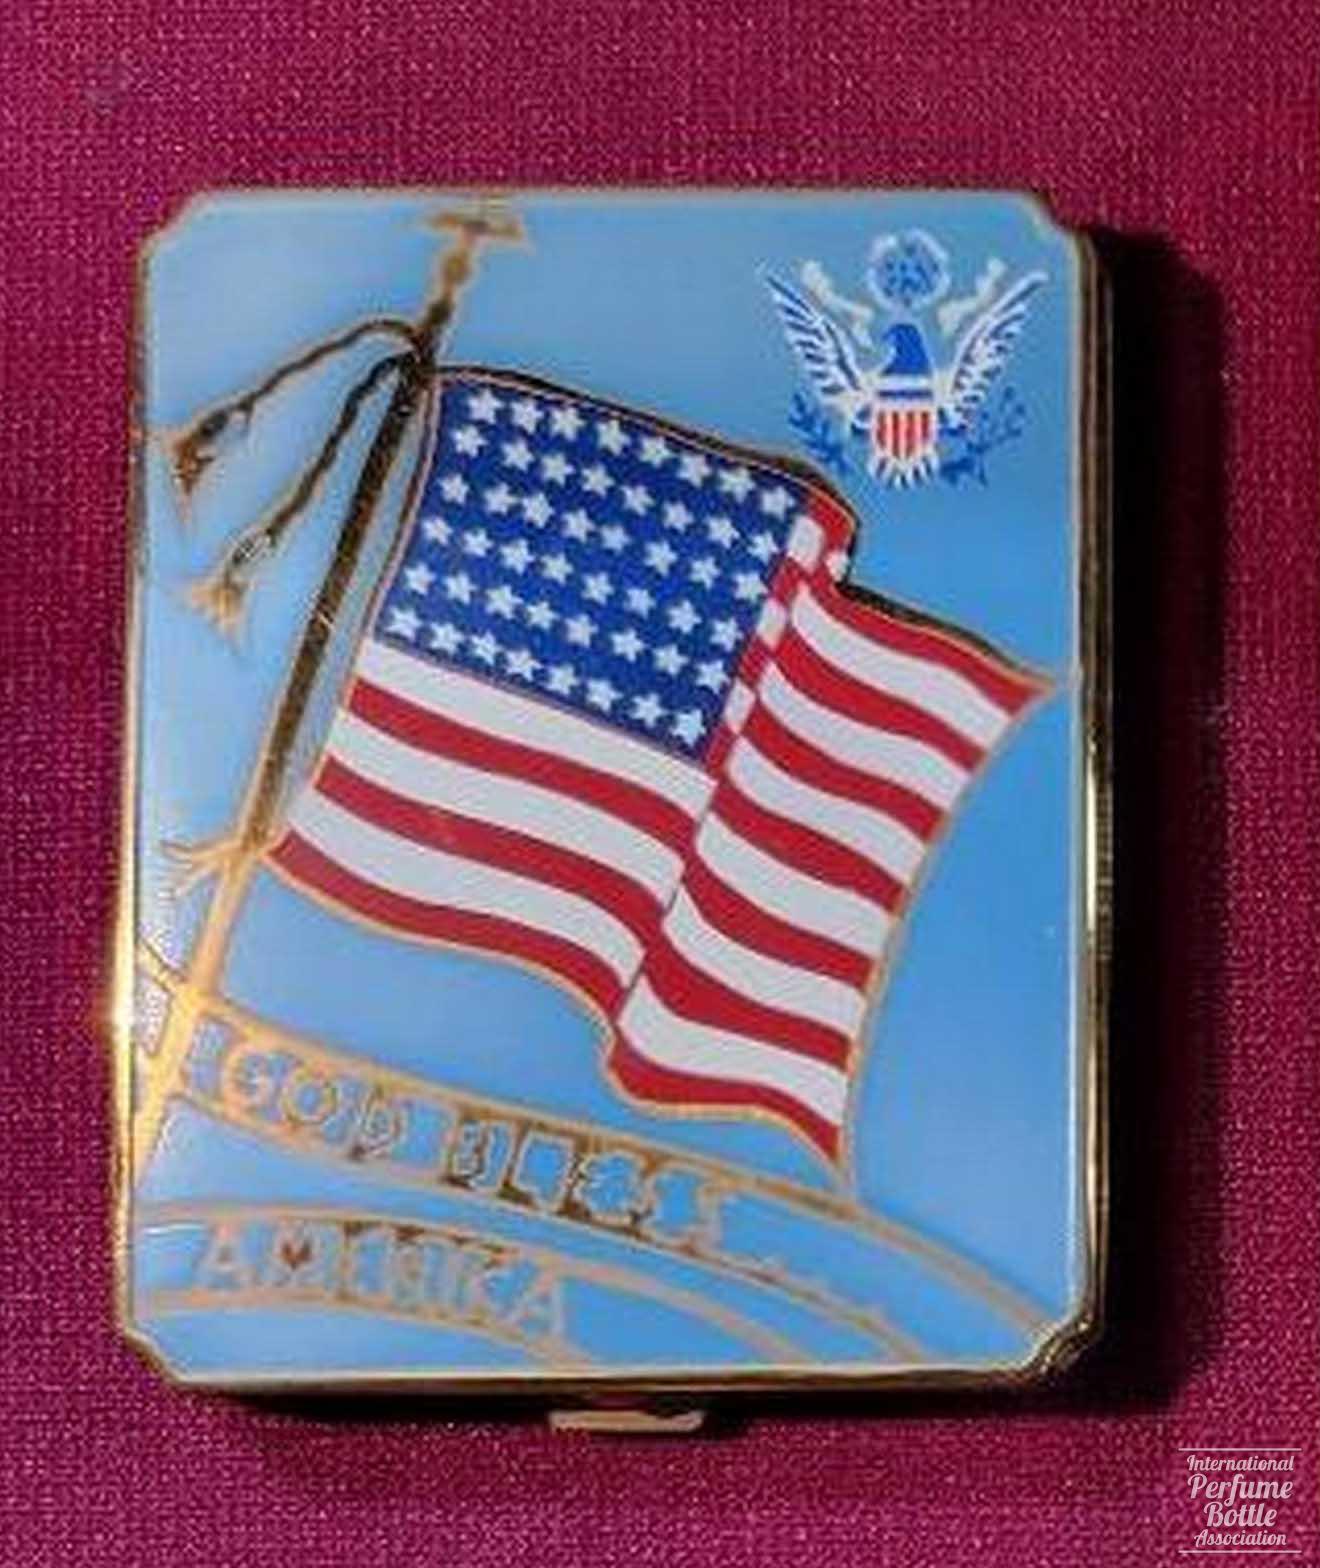 "God Bless America" Compact